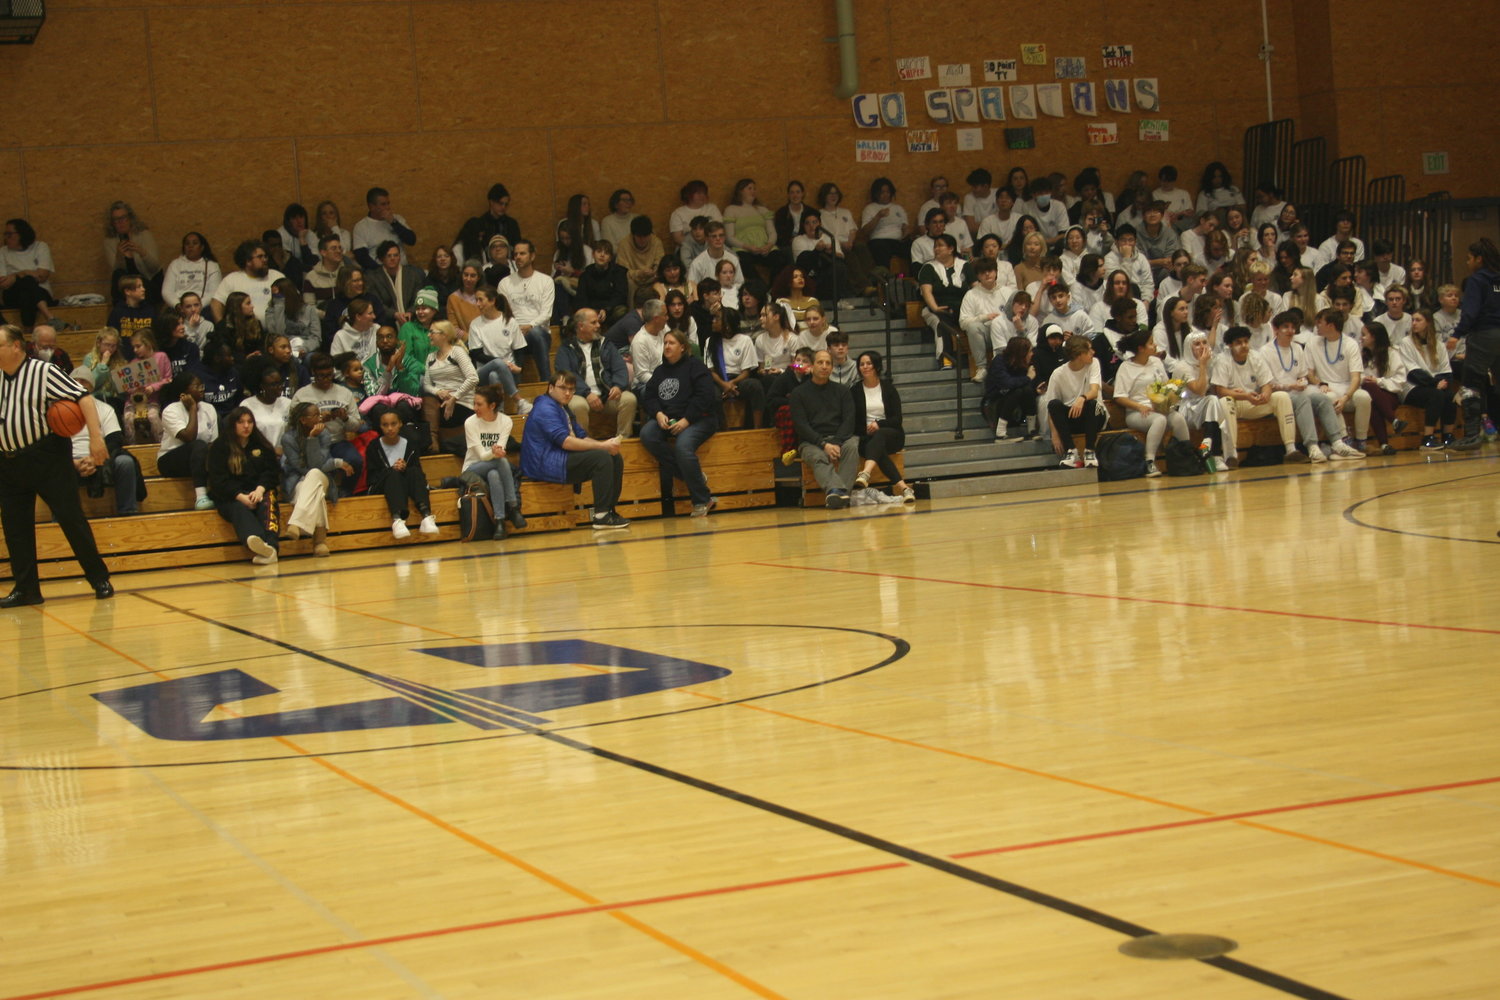 Don Leypoldt
The Solebury School faithful attend the Spartans’ White Out game, which doubled as Senior Night.